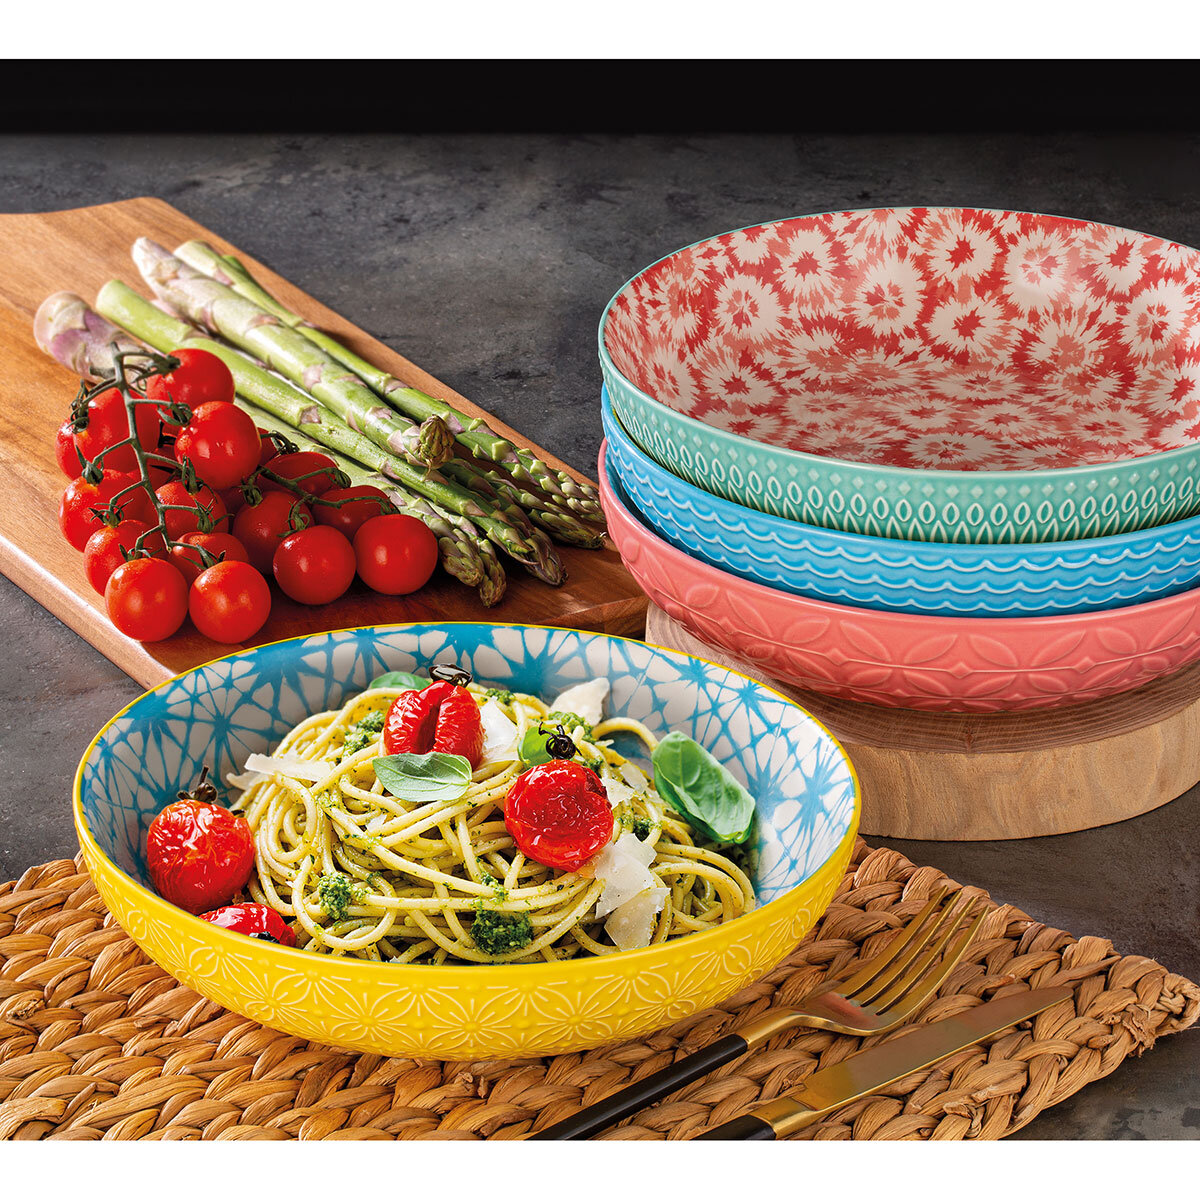 Signature House wares Stone ware Serving Bowls,4Piece